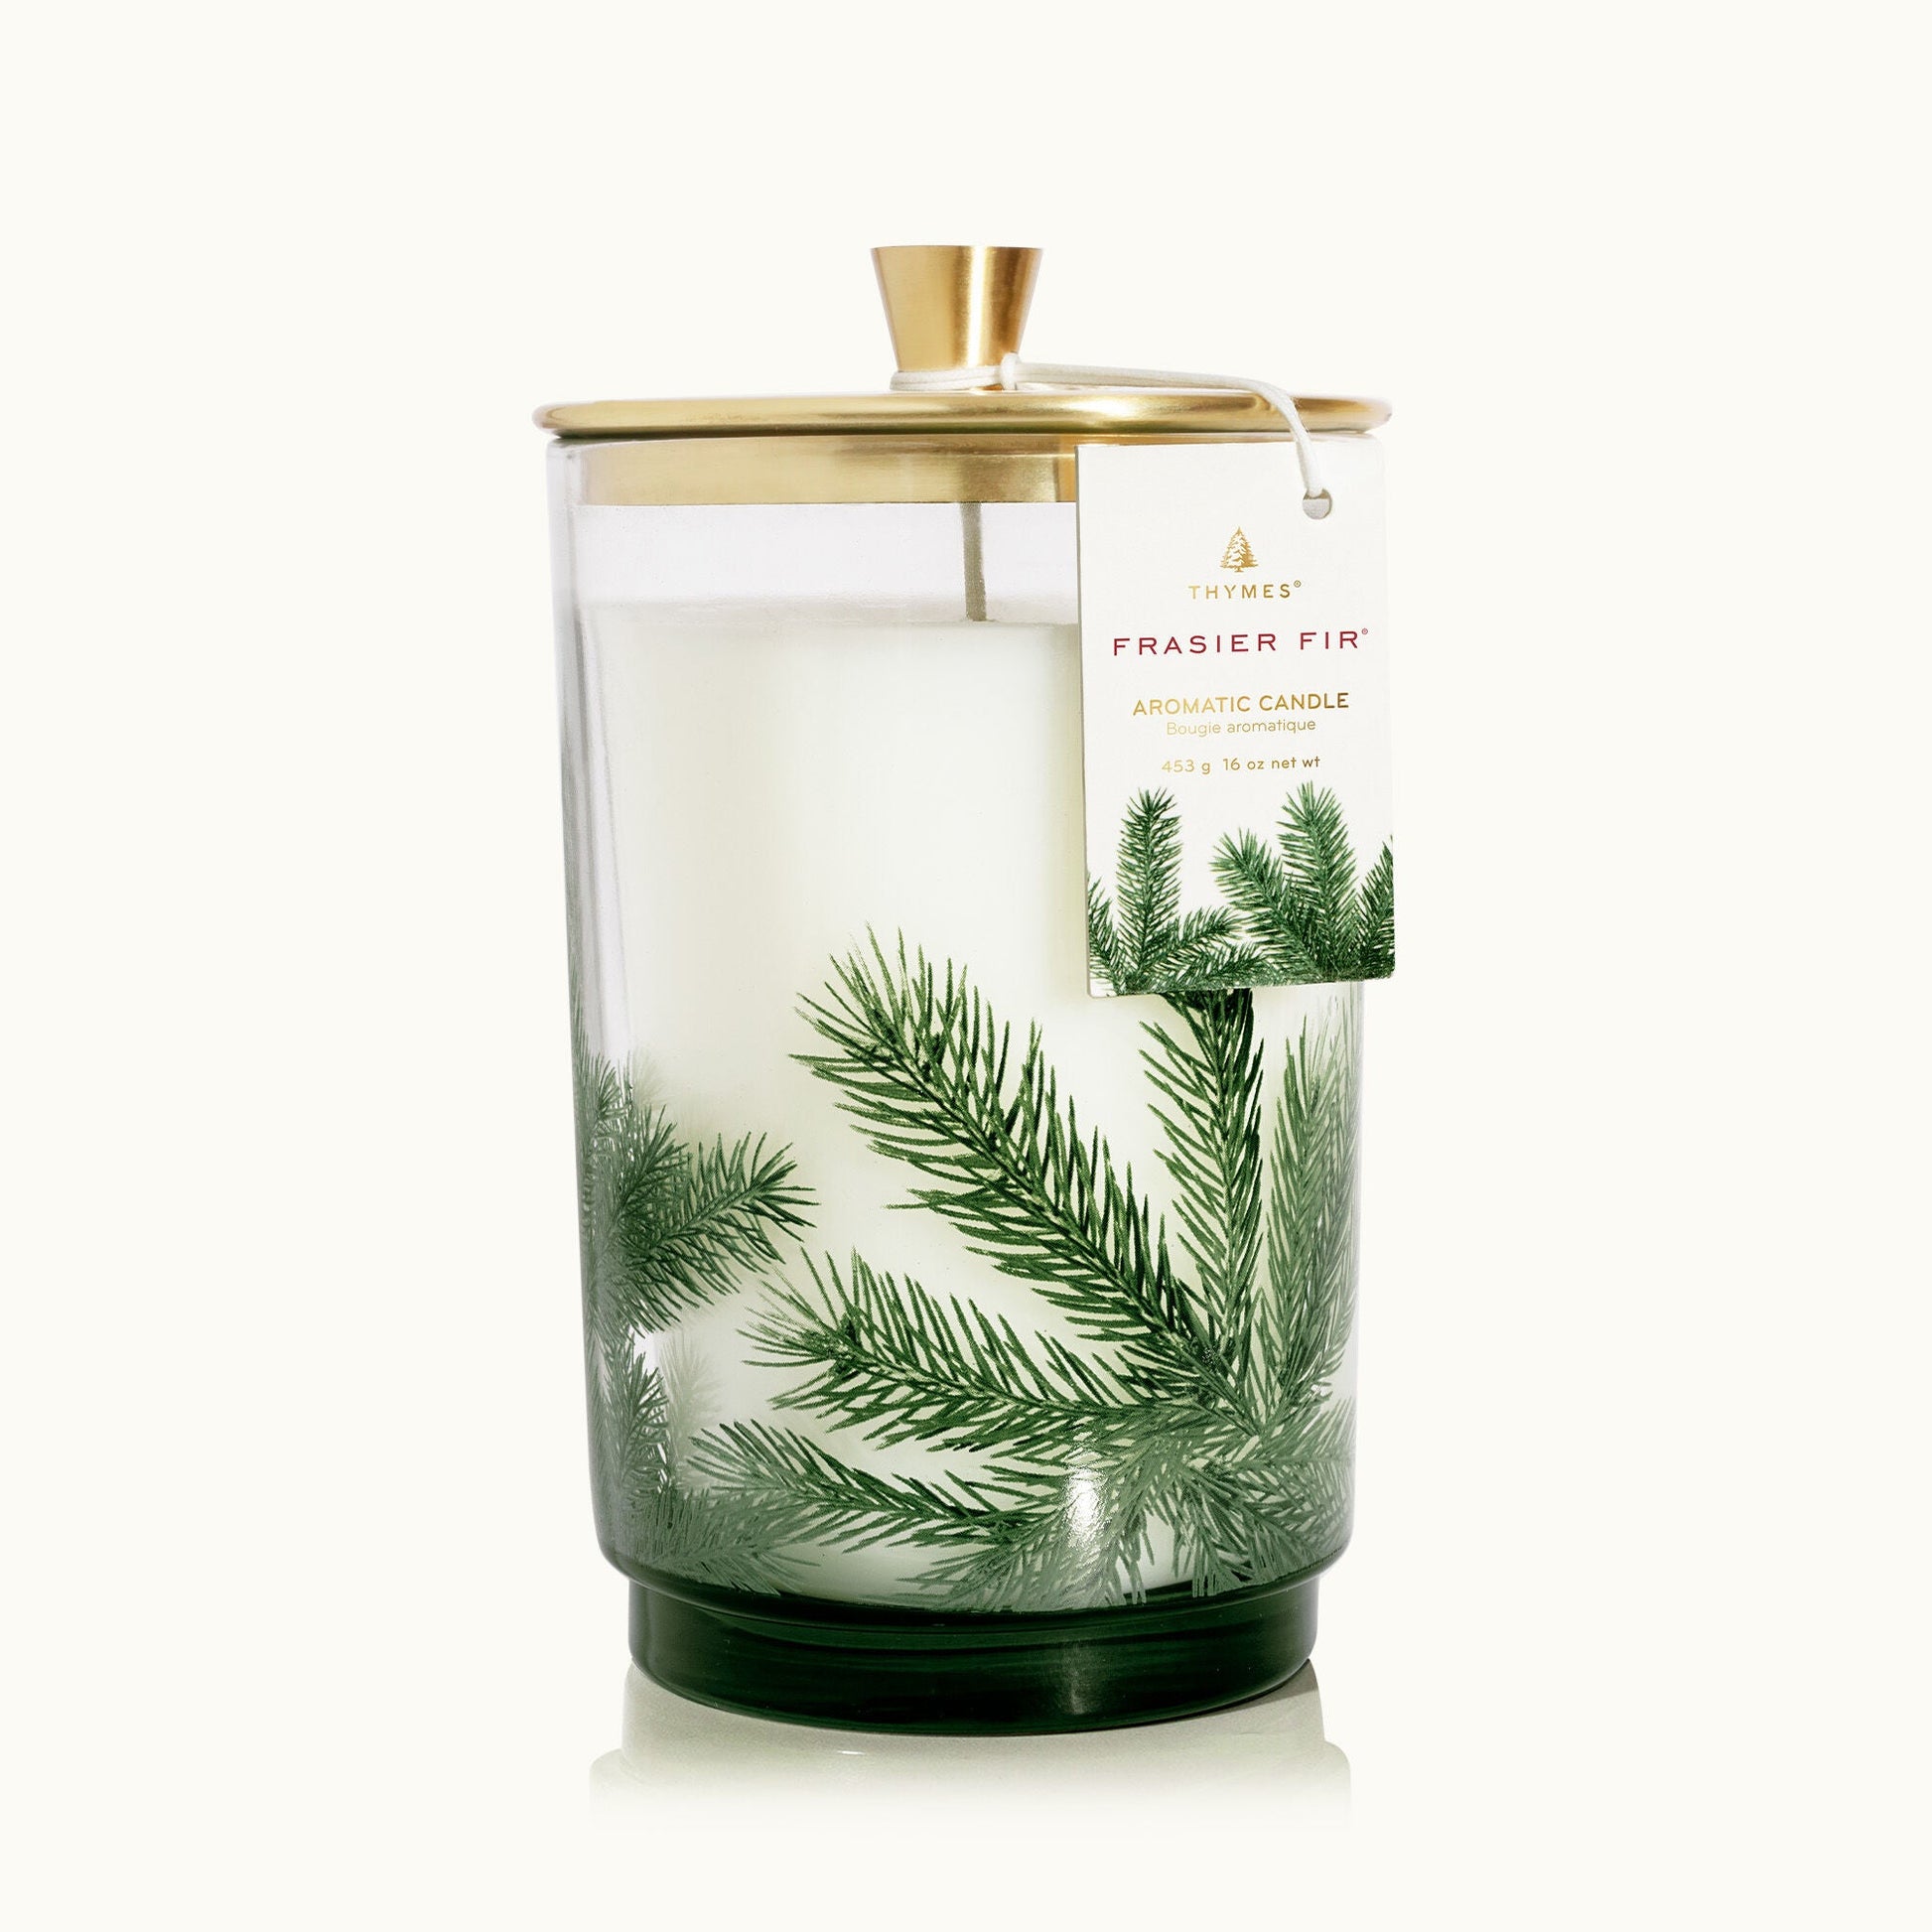 Thymes - Frasier Fir Statement Large Luminary Candle